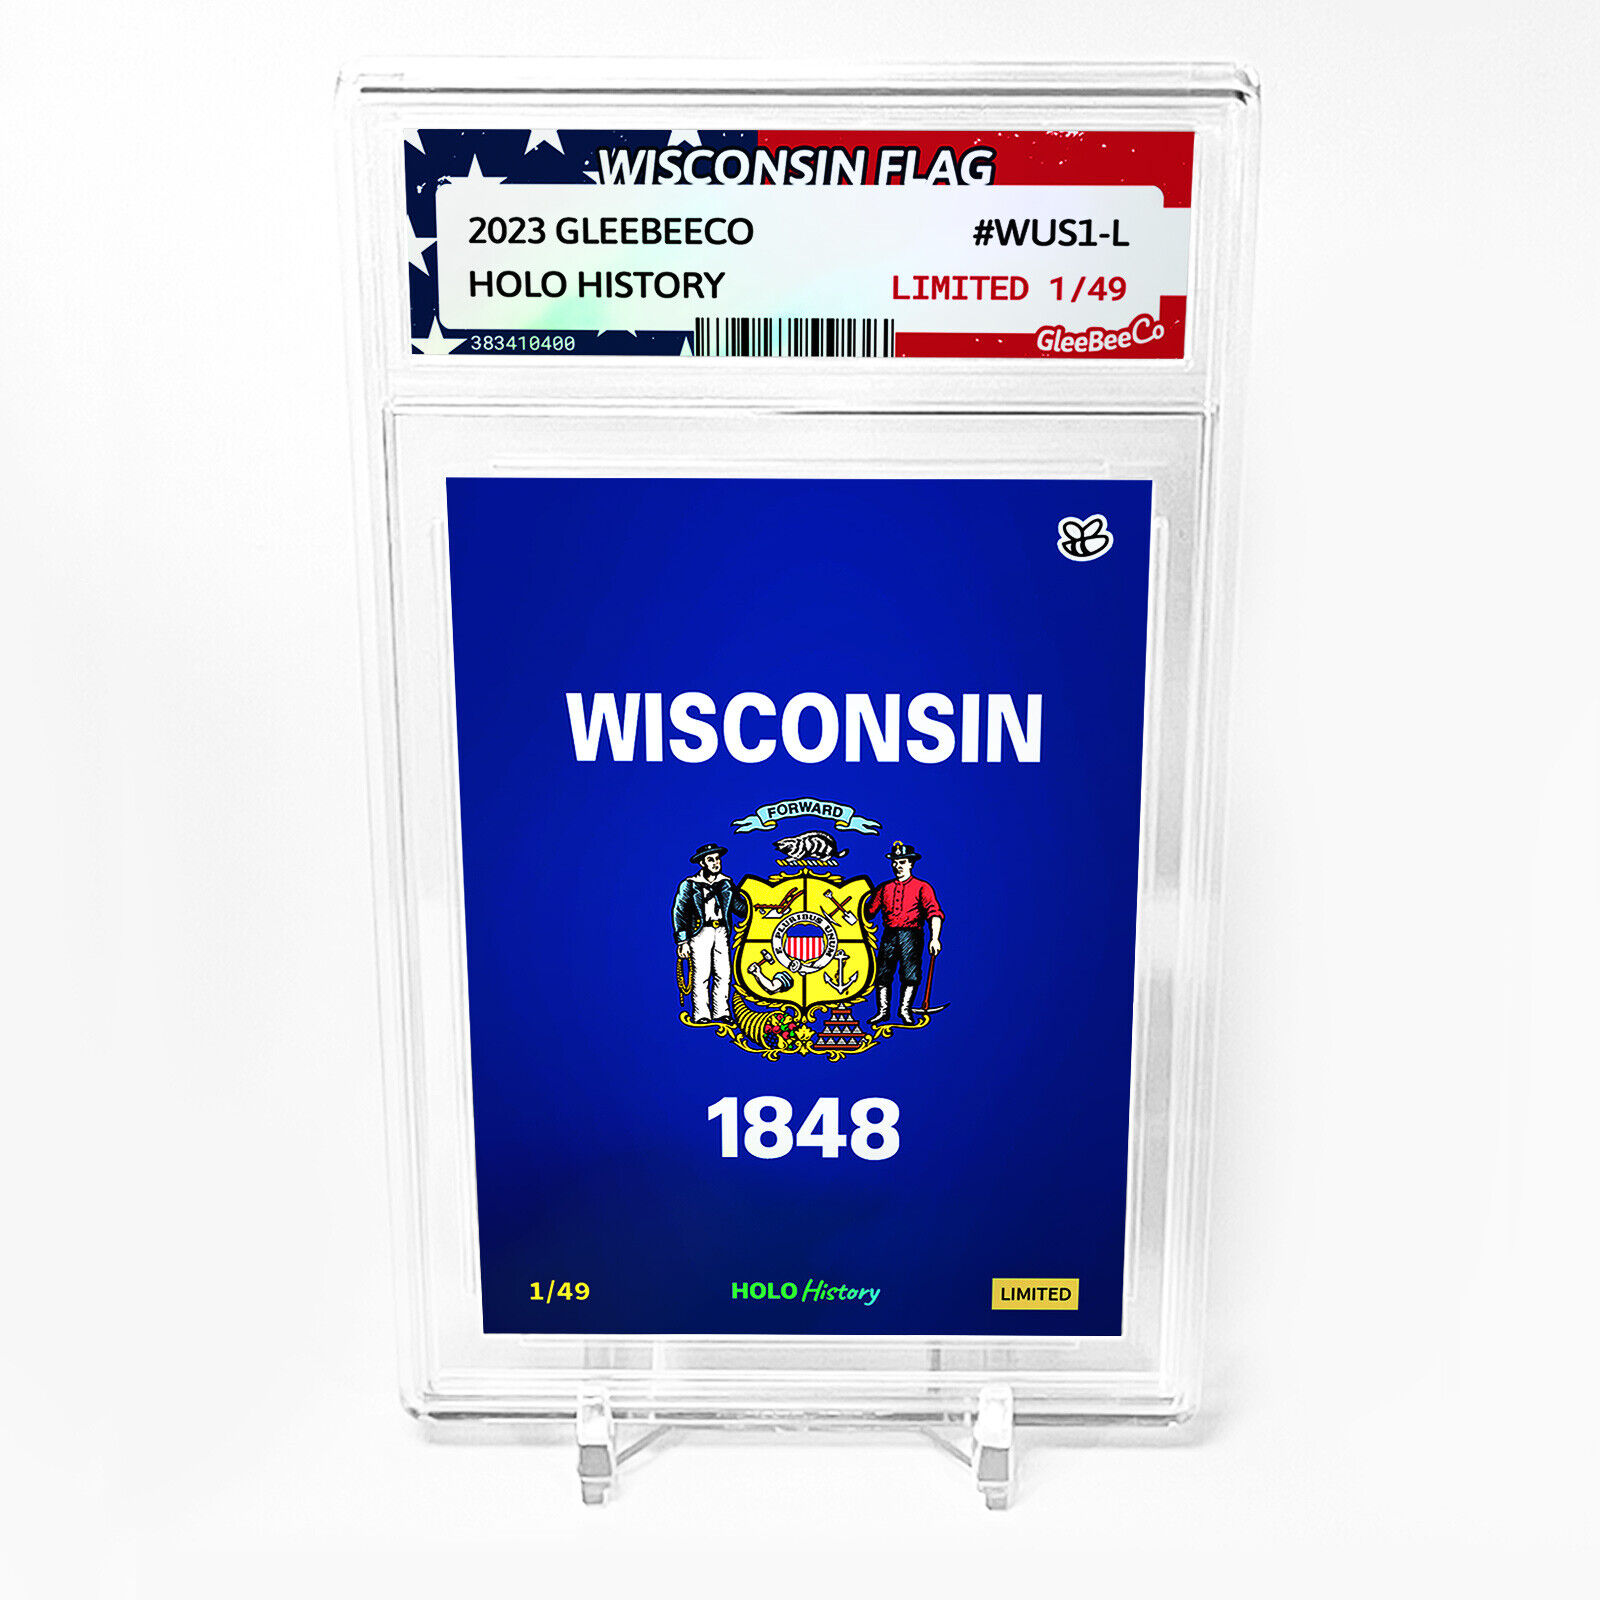 WISCONSIN FLAG U.S. State Flags 2023 GleeBeeCo Card Holographic #WUS1-L /49